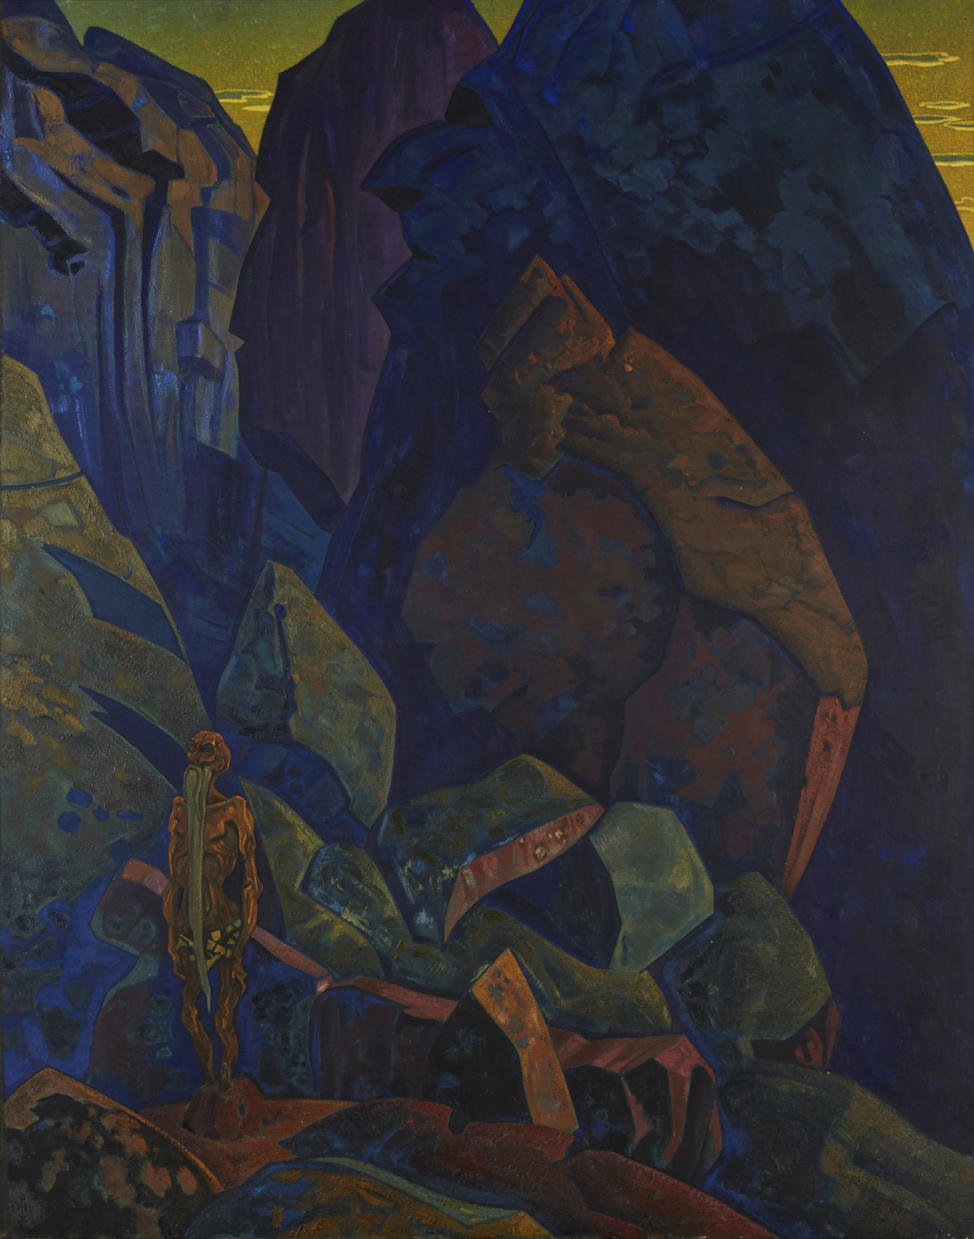 Nikolai Konstantinovich Roerich (Russian, 1874-1947) 'The praying stylite (Ecstasy)', 1918 unframed (Estimates available upon request)